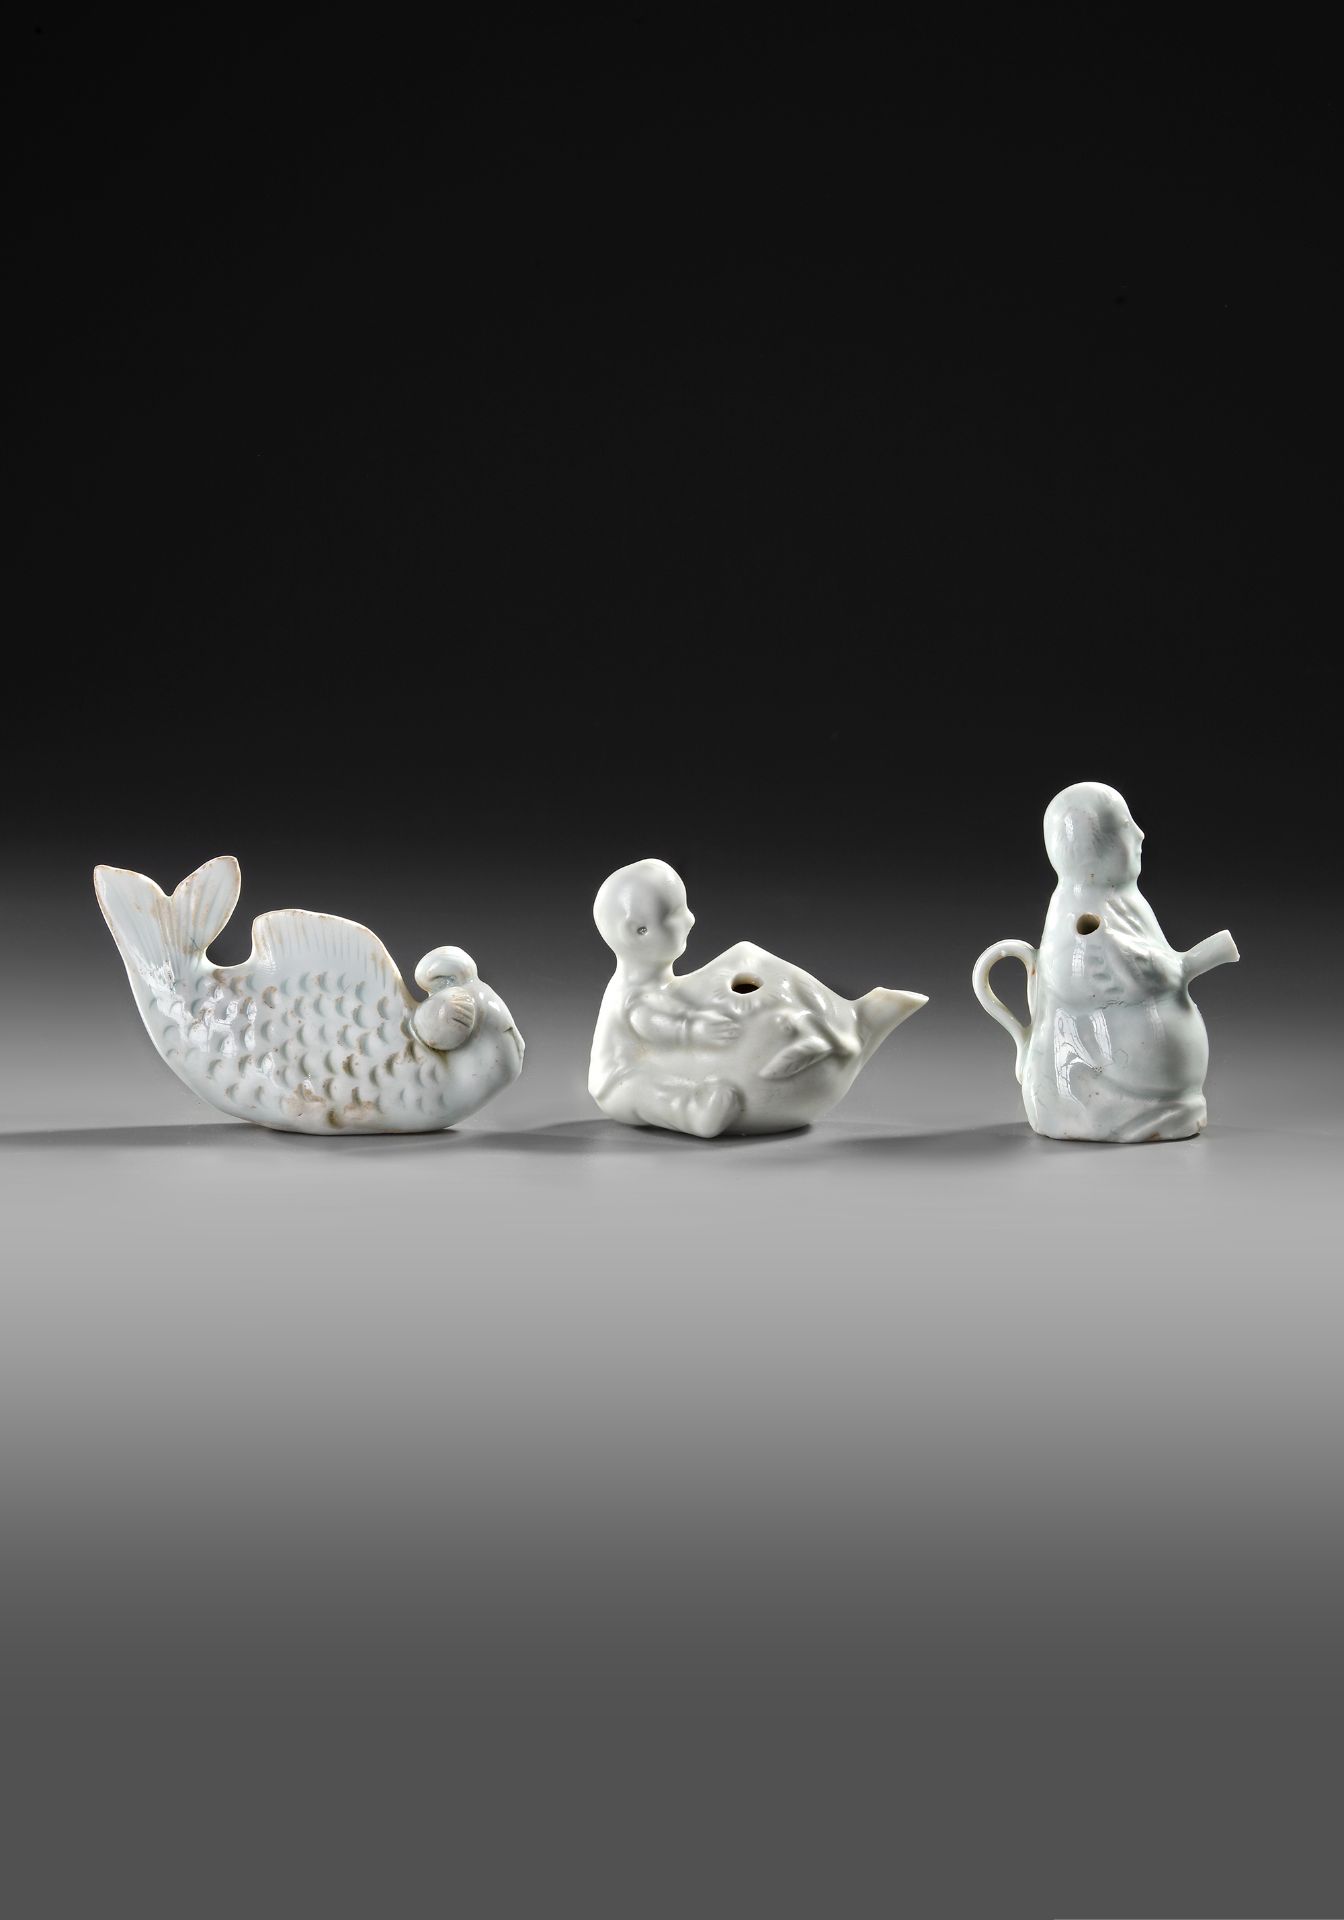 THREE CHINESE QINGBAI FIGURES, SONG DYNASTY (960-1279) - Image 2 of 4